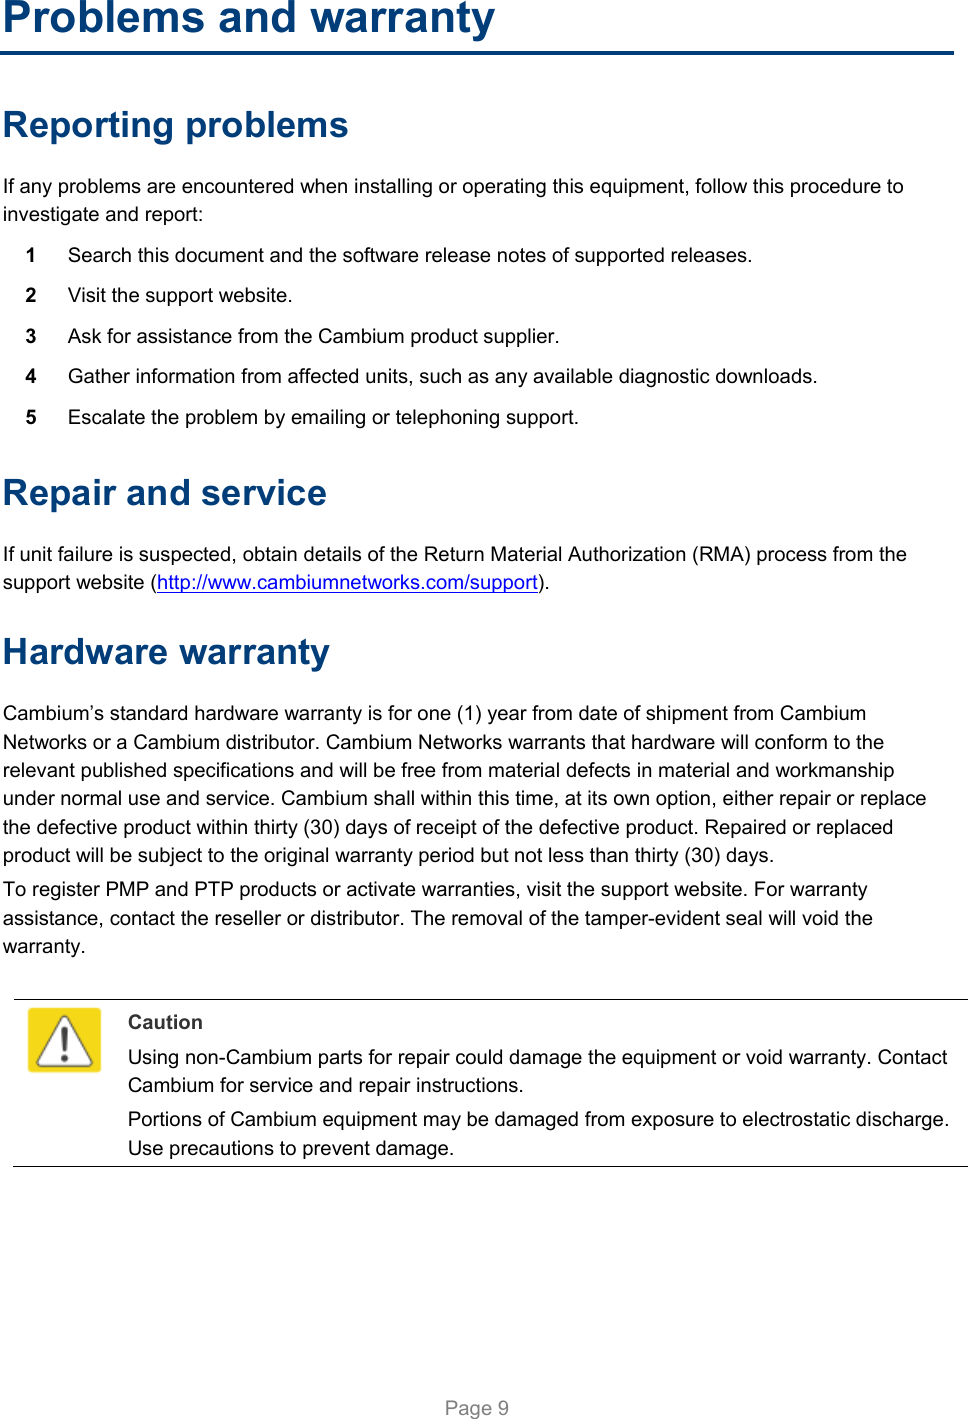   Page 9 Problems and warranty Reporting problems If any problems are encountered when installing or operating this equipment, follow this procedure to investigate and report: 1  Search this document and the software release notes of supported releases. 2  Visit the support website. 3  Ask for assistance from the Cambium product supplier. 4  Gather information from affected units, such as any available diagnostic downloads. 5  Escalate the problem by emailing or telephoning support. Repair and service If unit failure is suspected, obtain details of the Return Material Authorization (RMA) process from the support website (http://www.cambiumnetworks.com/support). Hardware warranty Cambium’s standard hardware warranty is for one (1) year from date of shipment from Cambium Networks or a Cambium distributor. Cambium Networks warrants that hardware will conform to the relevant published specifications and will be free from material defects in material and workmanship under normal use and service. Cambium shall within this time, at its own option, either repair or replace the defective product within thirty (30) days of receipt of the defective product. Repaired or replaced product will be subject to the original warranty period but not less than thirty (30) days. To register PMP and PTP products or activate warranties, visit the support website. For warranty assistance, contact the reseller or distributor. The removal of the tamper-evident seal will void the warranty.   Caution Using non-Cambium parts for repair could damage the equipment or void warranty. Contact Cambium for service and repair instructions. Portions of Cambium equipment may be damaged from exposure to electrostatic discharge. Use precautions to prevent damage.  